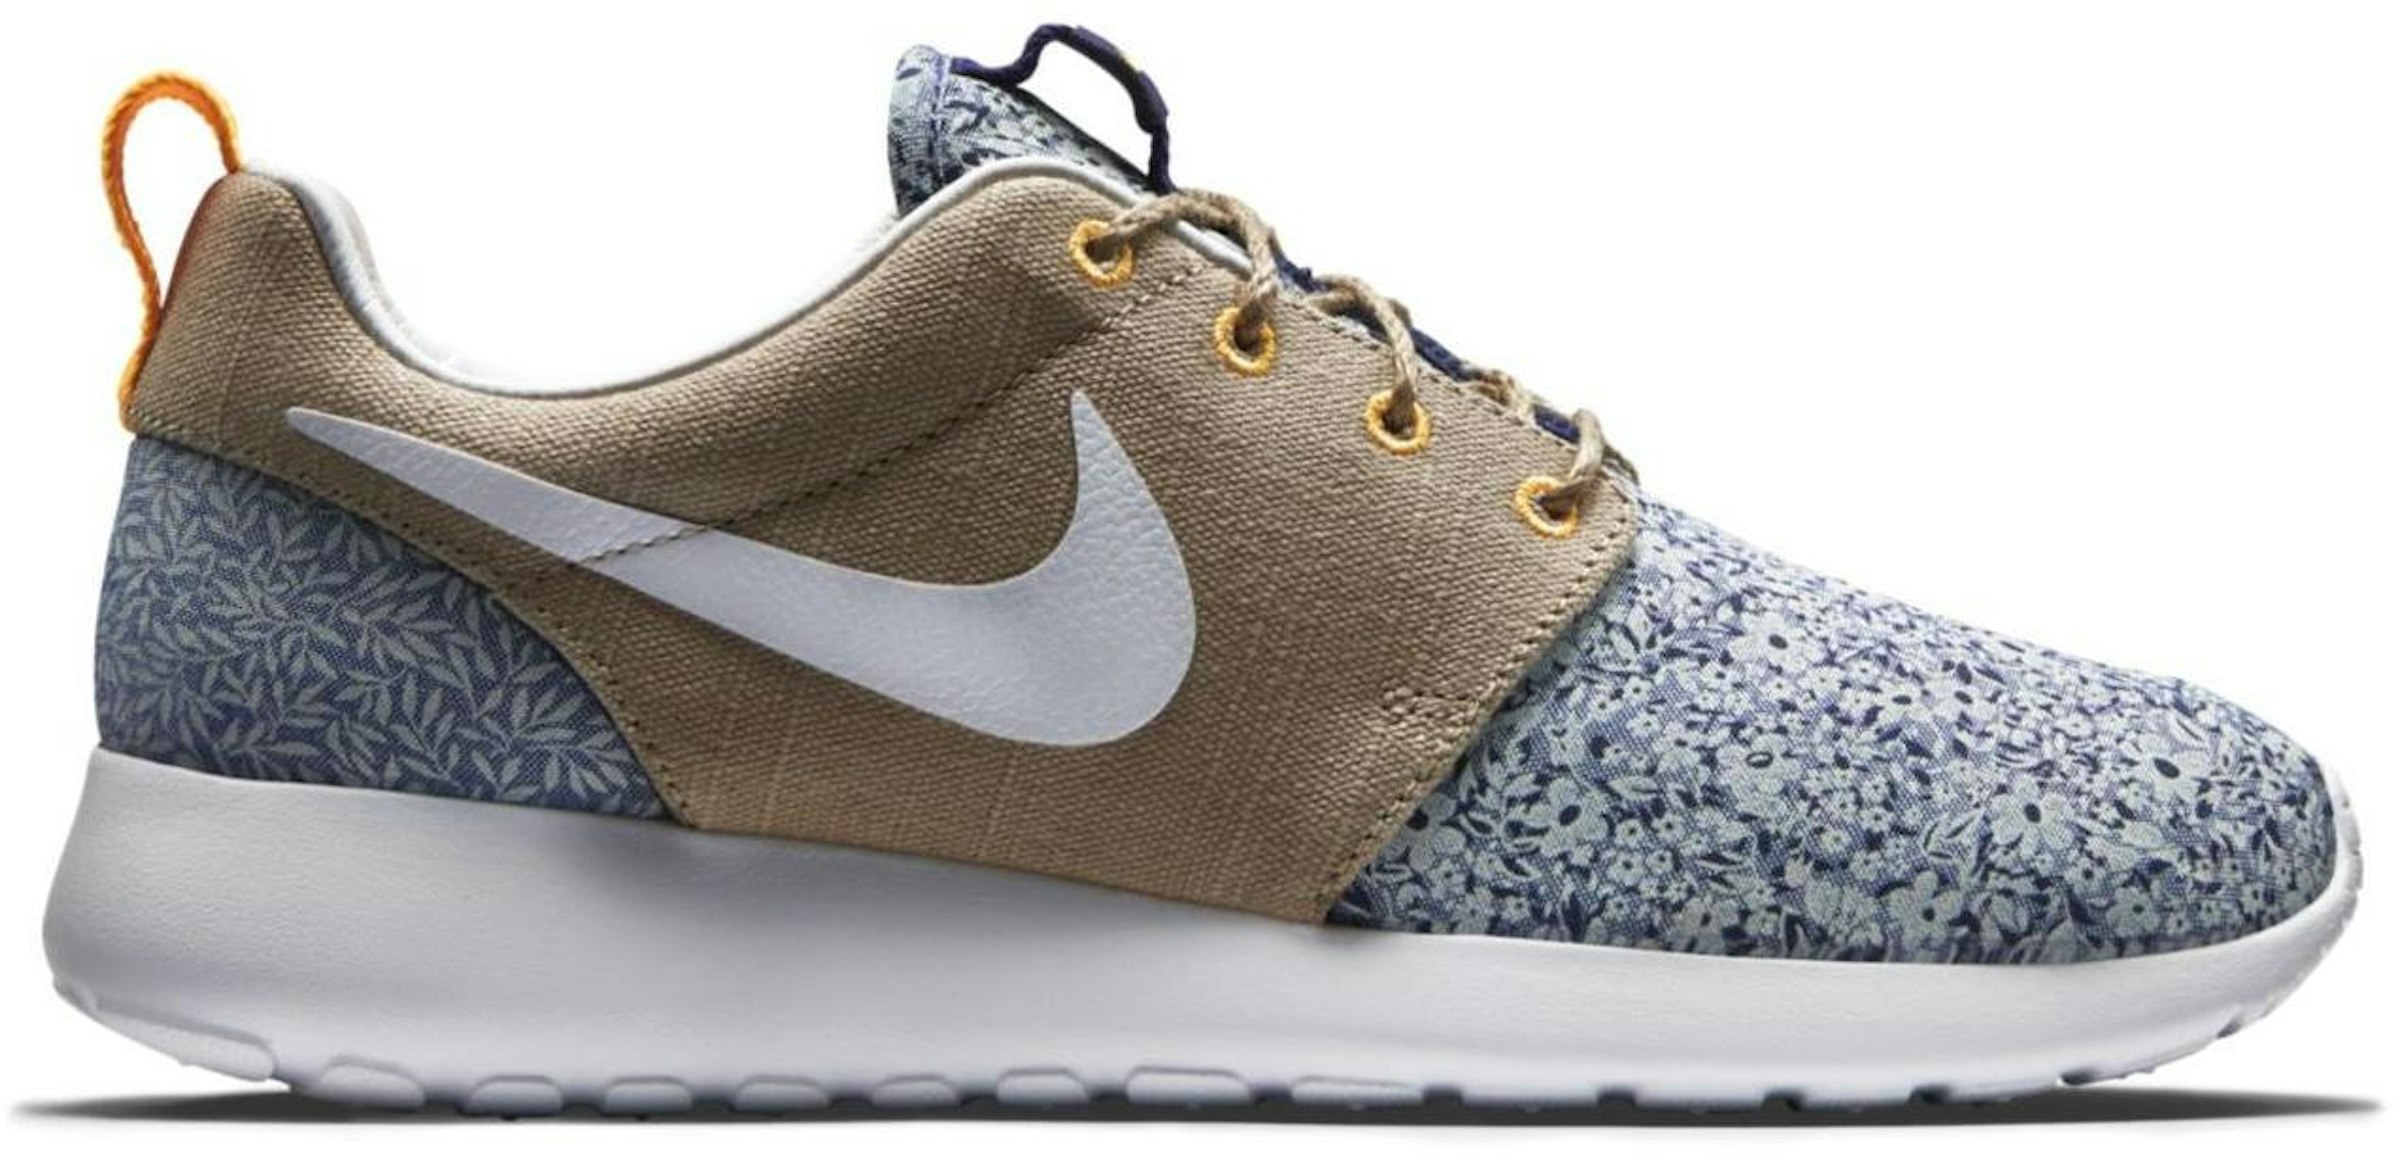 Claire Invalidez Email Nike Roshe Run Liberty Blue Recall (GS) Kids' - 654165-400 - US